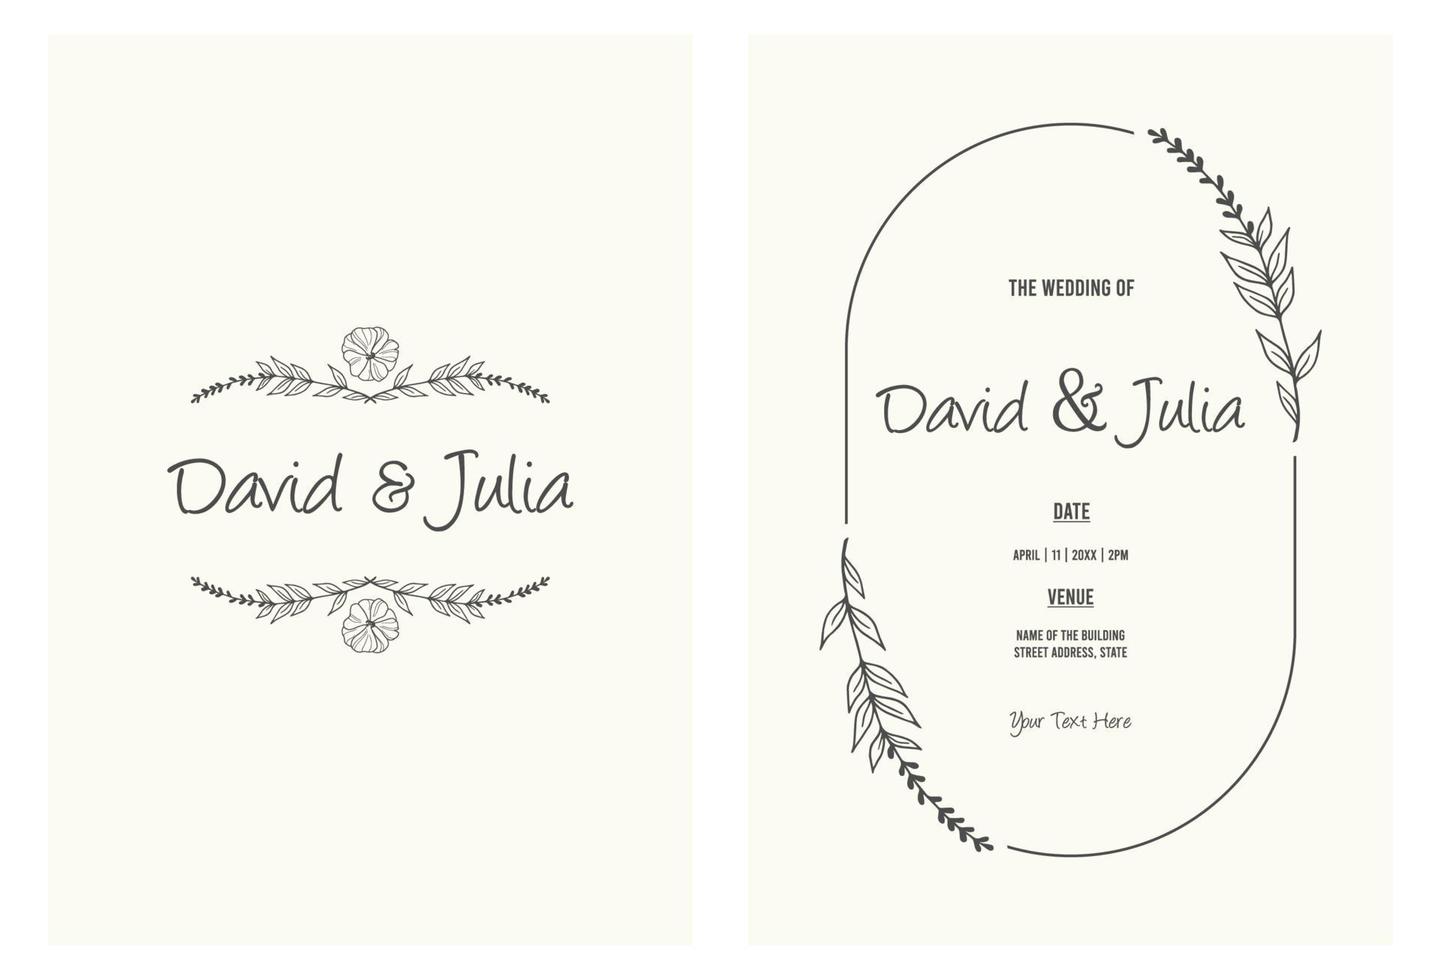 Vintage minimalist wedding invitation card template design, line art drawing of flowers with frame on paper vector